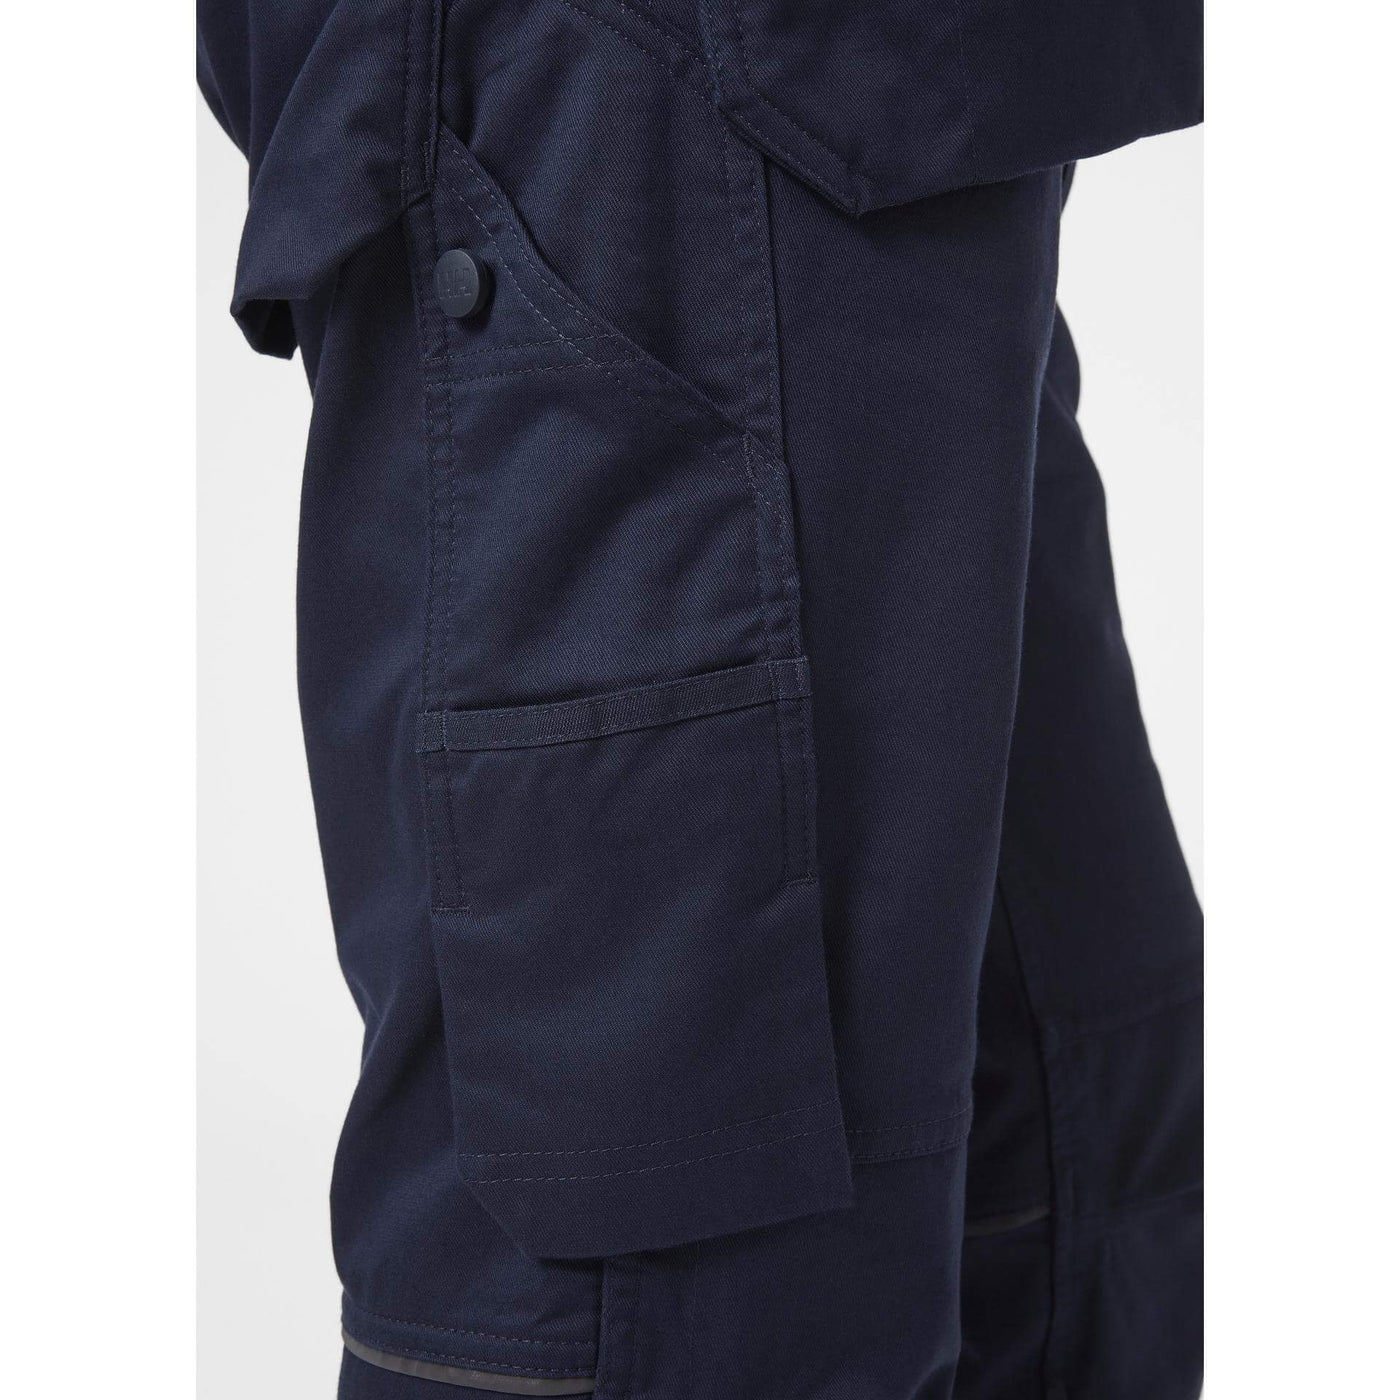 Helly Hansen Manchester Stretch Construction Trousers Navy 6 Feature 2#colour_navy